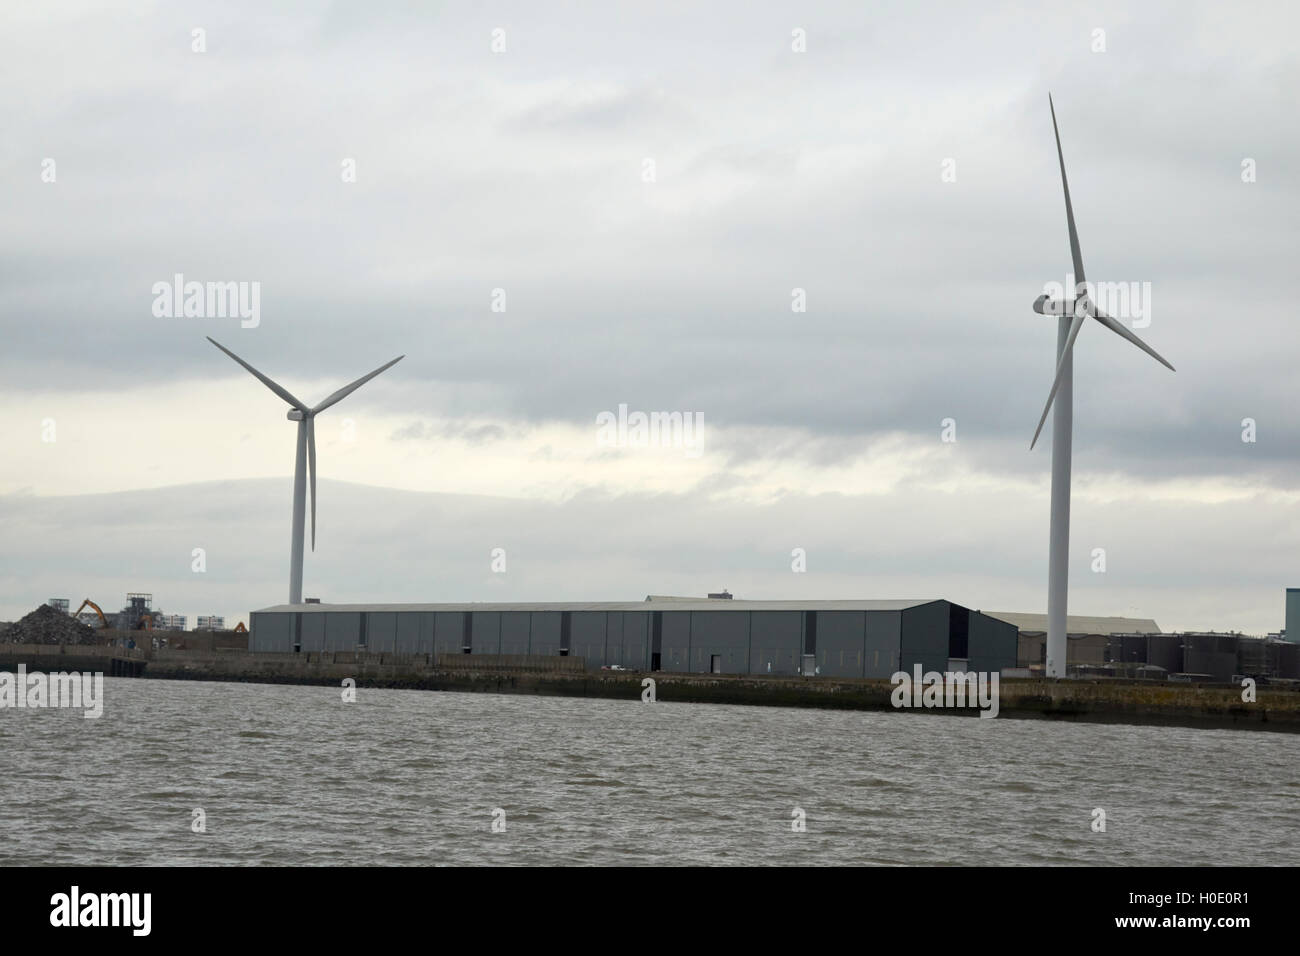 wind turbines and commercial buildings on langton dock Liverpool Merseyside UK Stock Photo